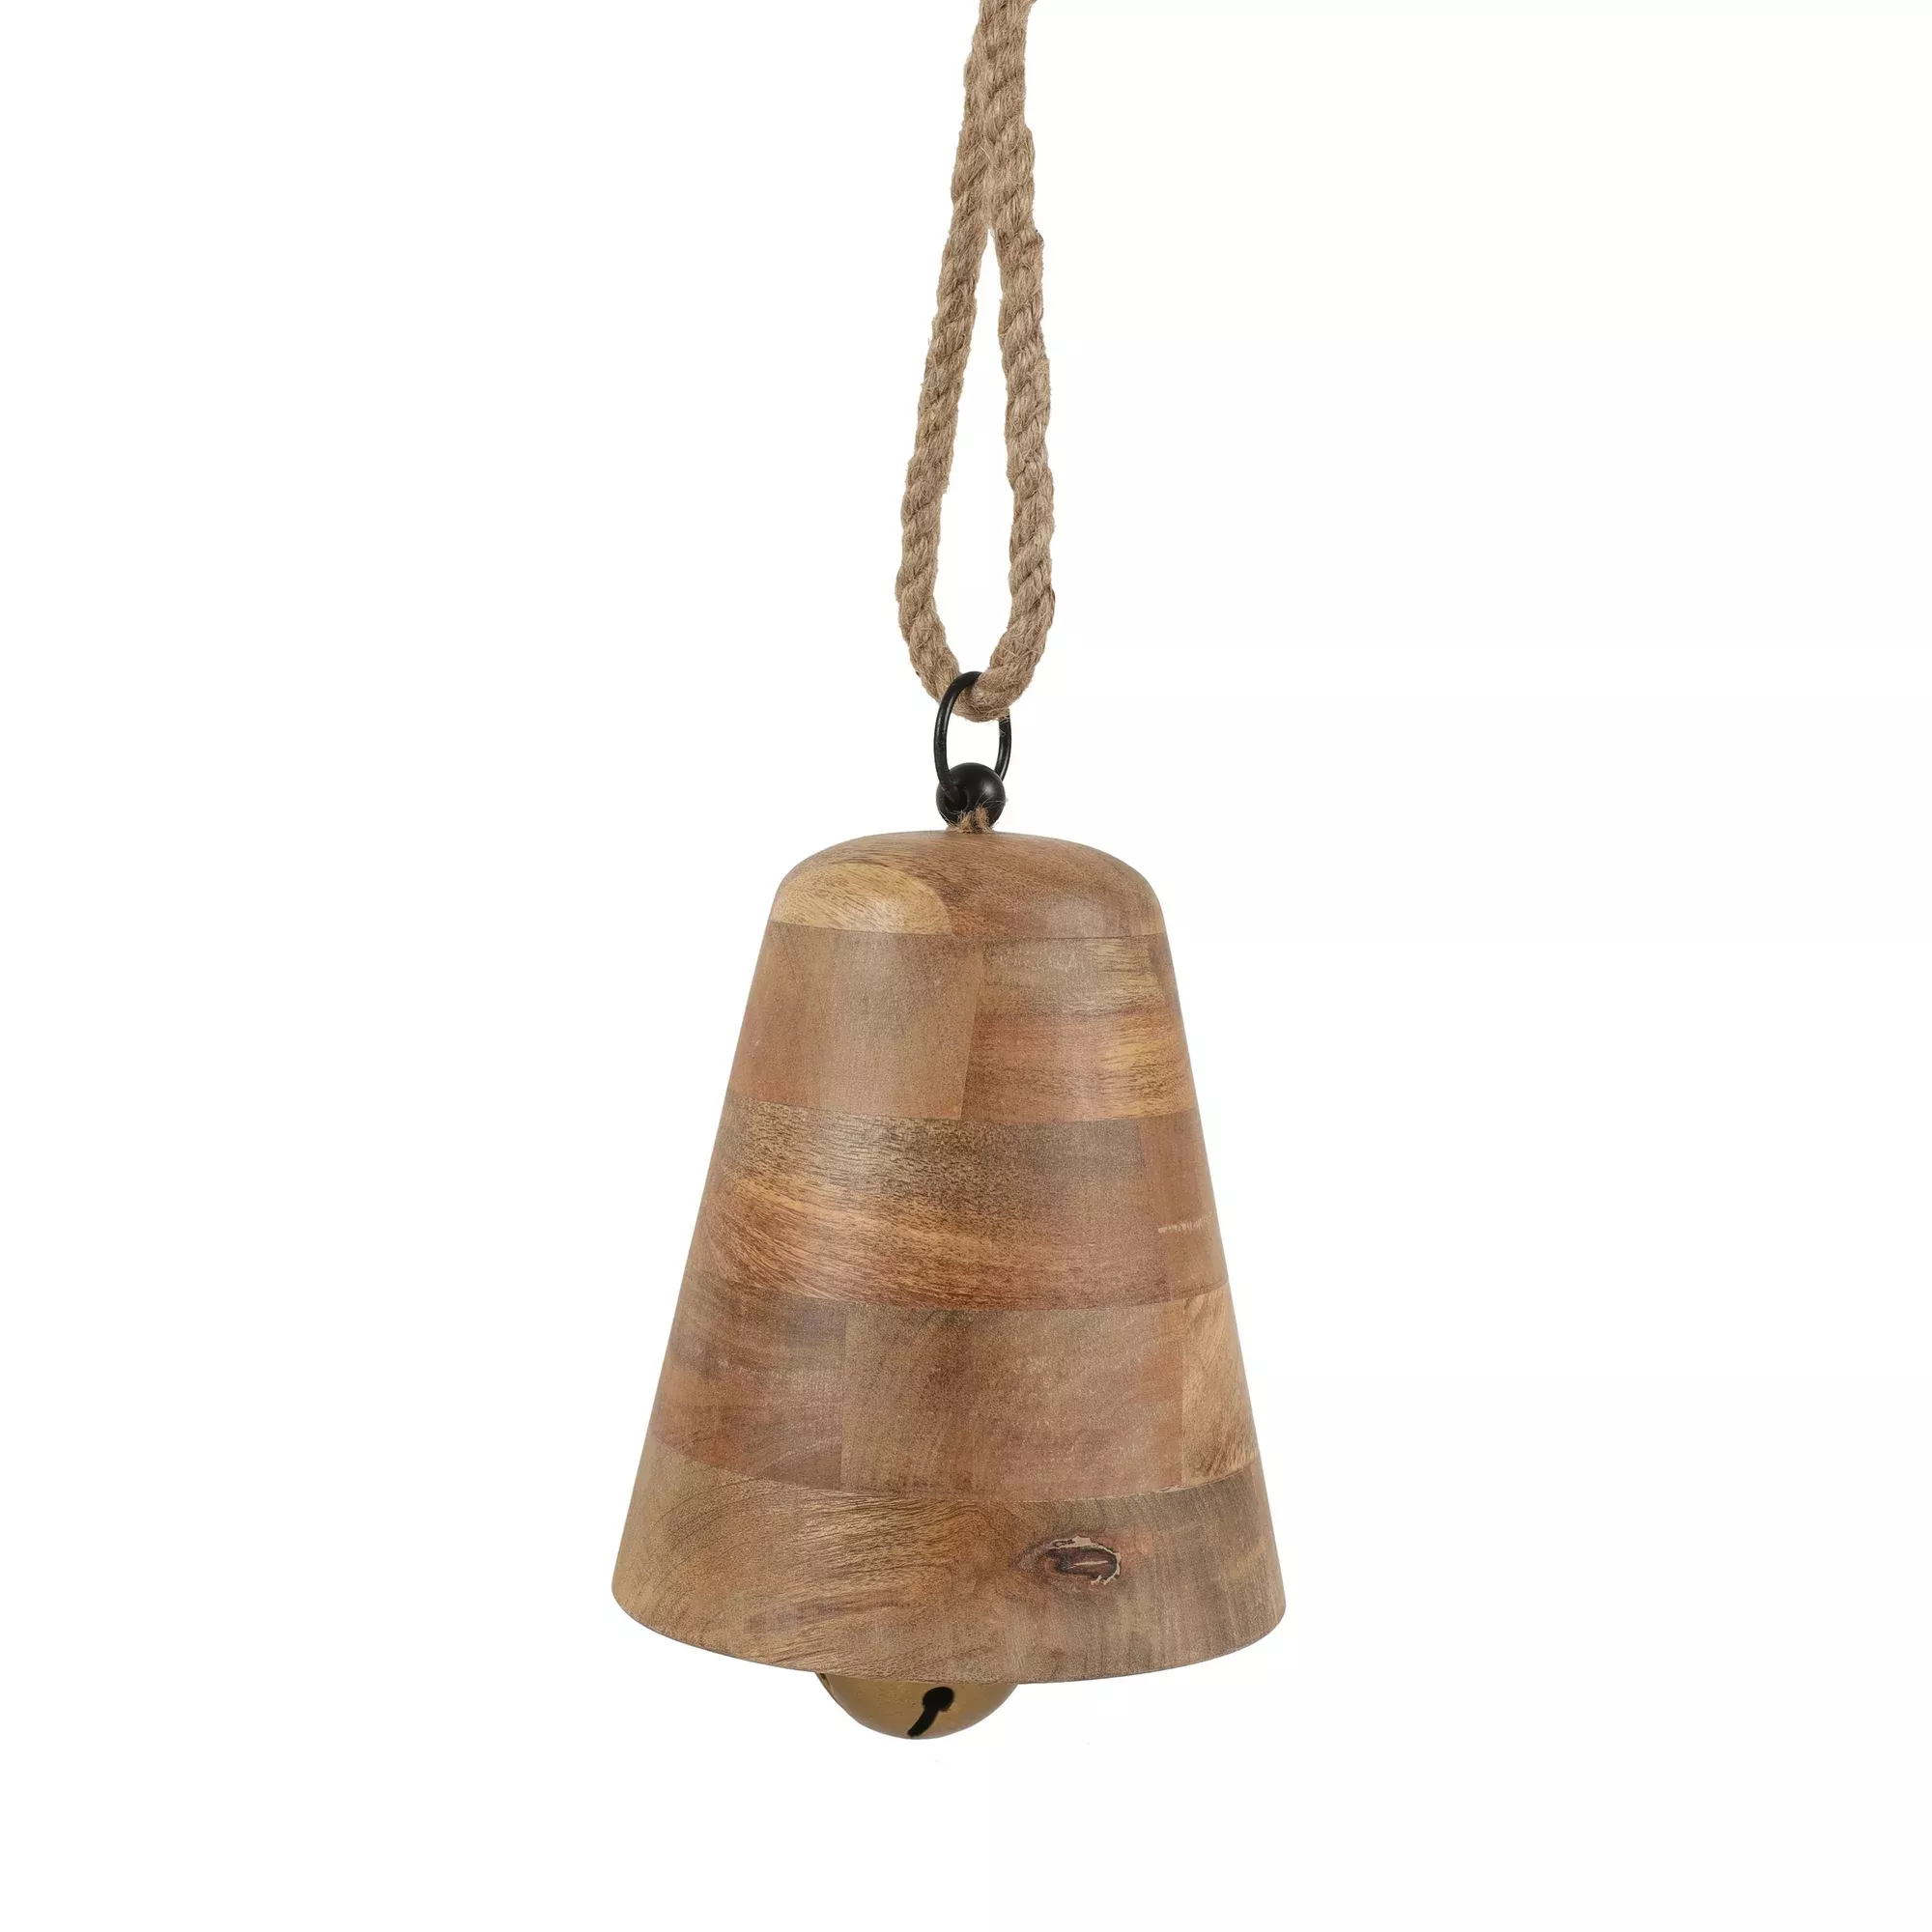 My Texas House Wood Jingle Bell Christmas Hanging Décor in Natural Finish,  10 inch 